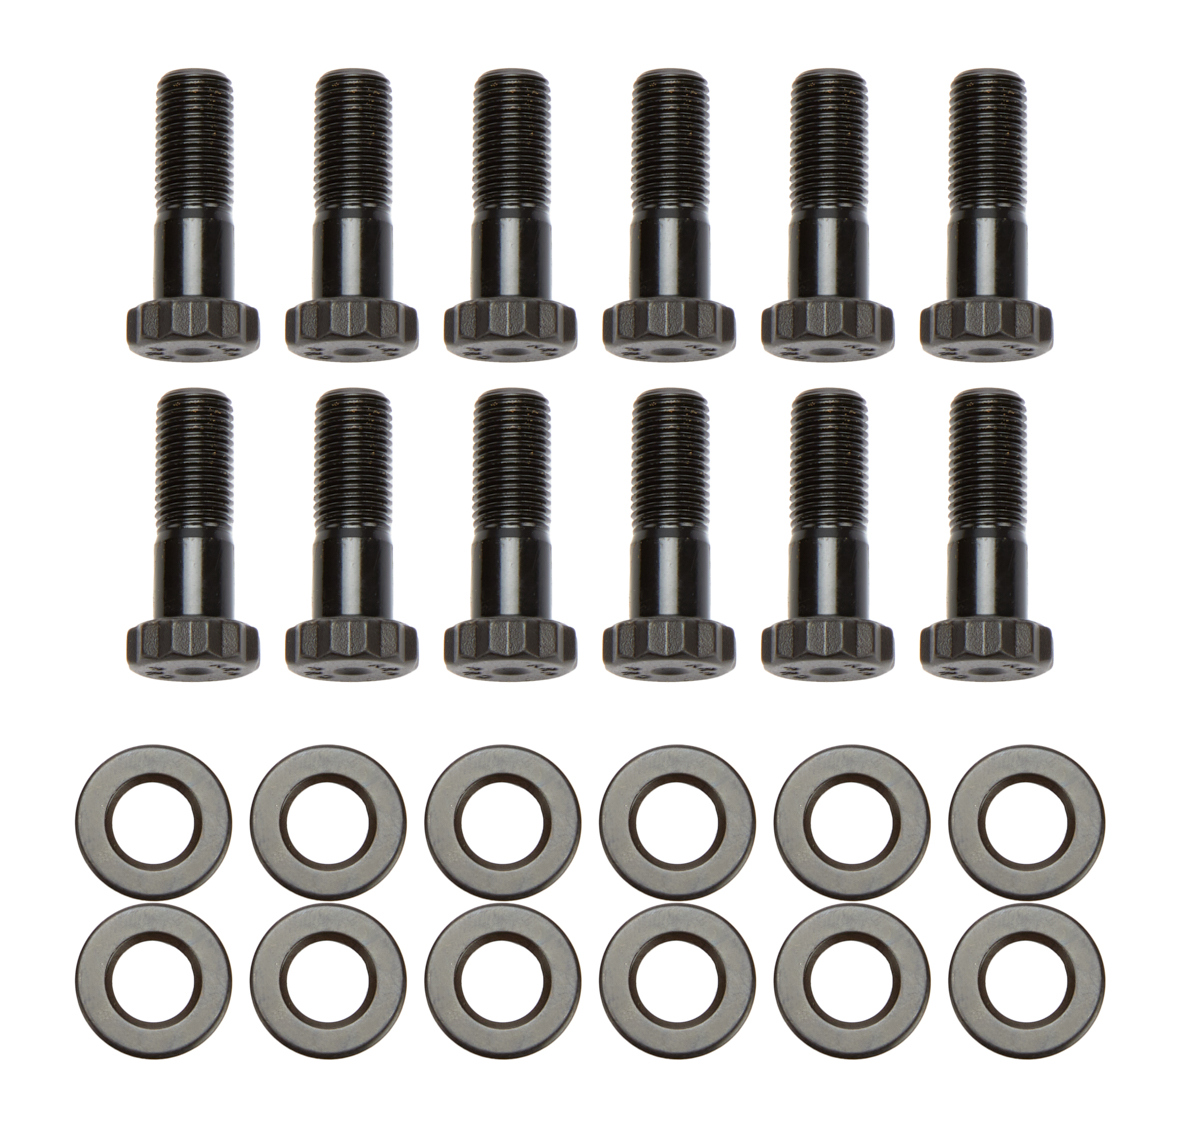 Tiger Quick Change 2055D Ring Gear Bolt Kit, 3/8-24 in Thread, 1.125 in Long, 12 Point Head, Chromoly, Black Oxide, Tiger Quick Change, Kit